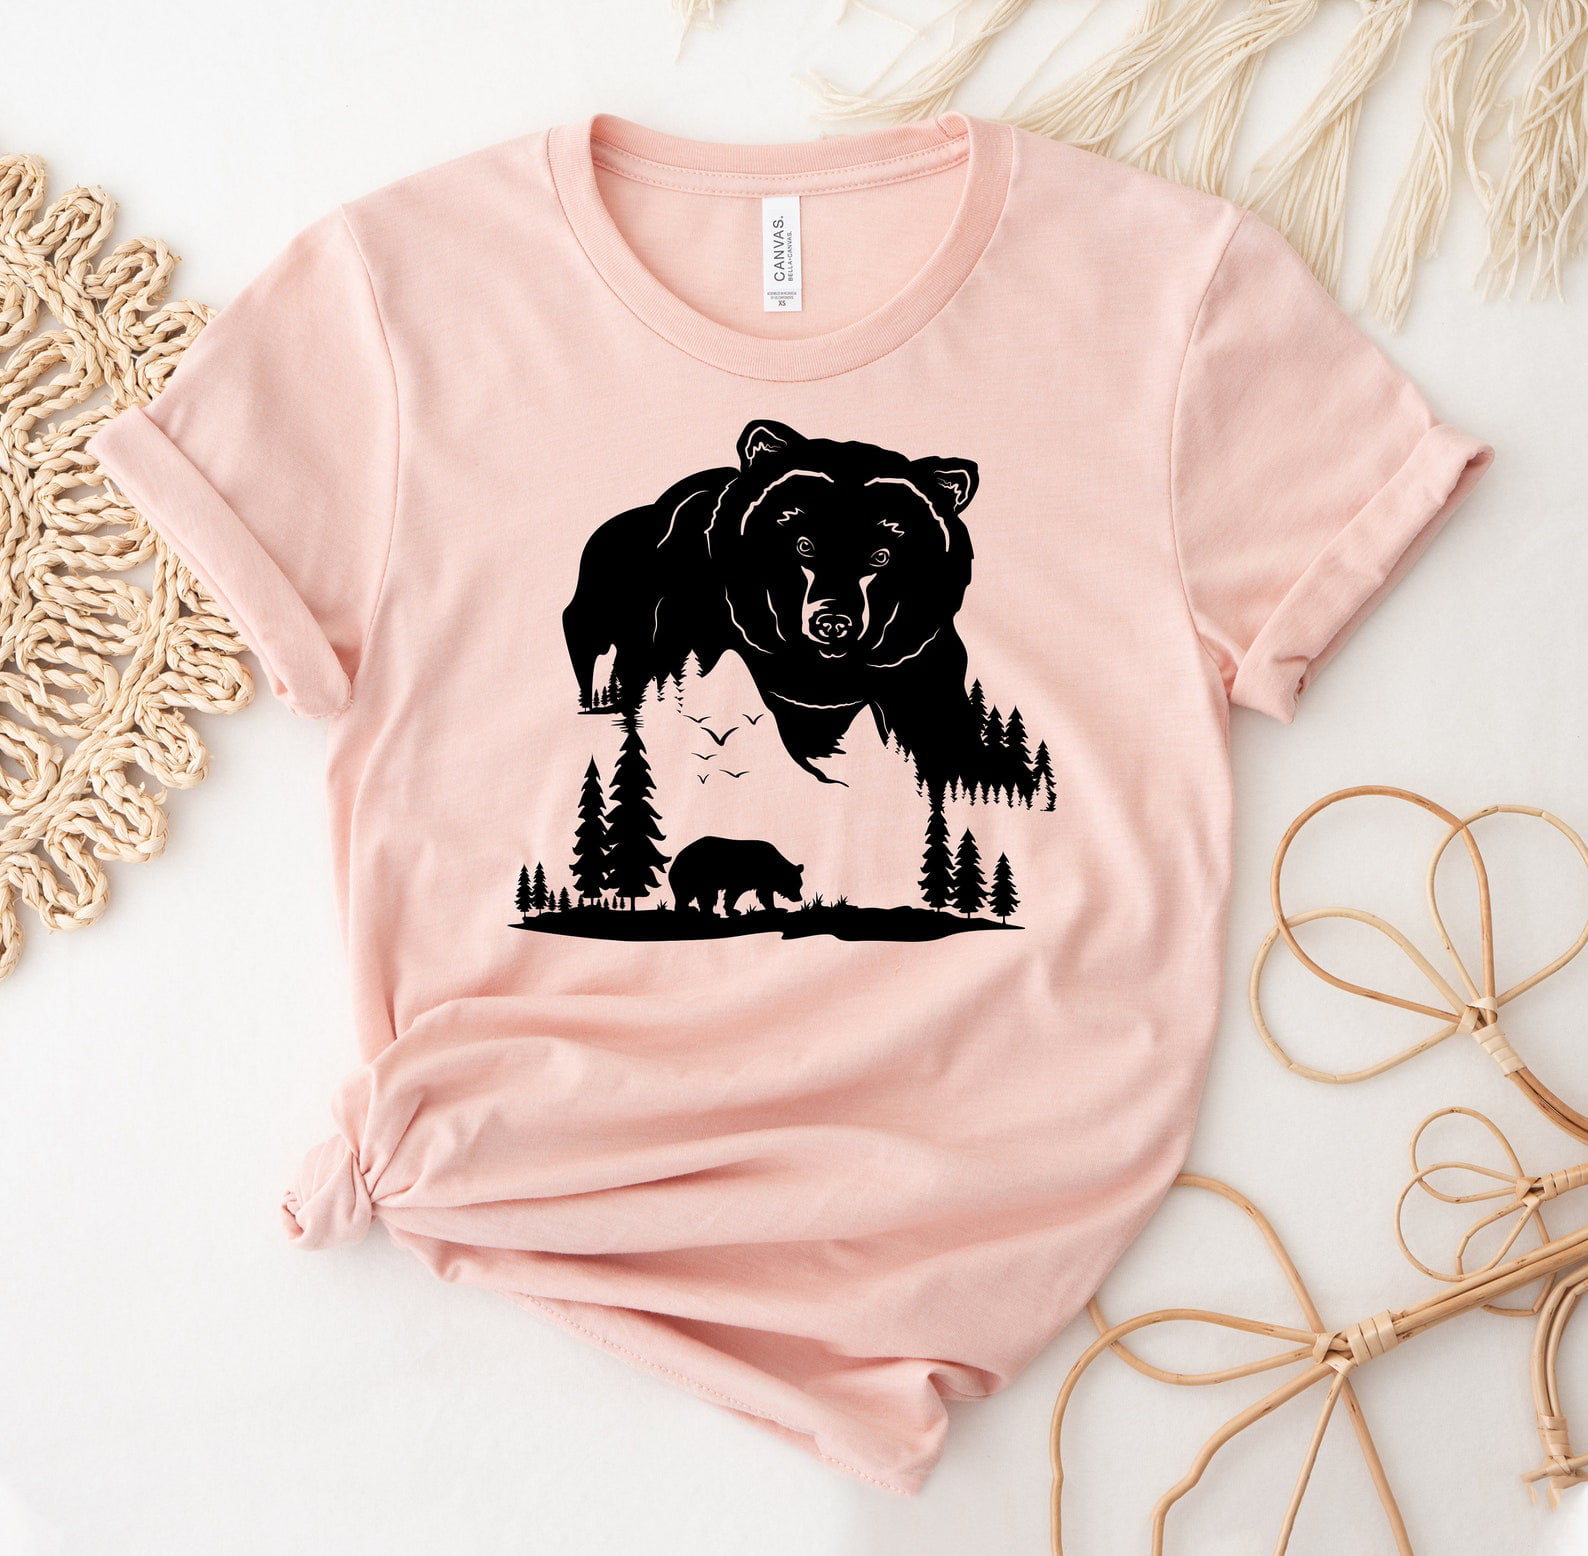 Bear Jungle T-shirt Cute Animal Shirt Forest Rescue Angry Camping ...